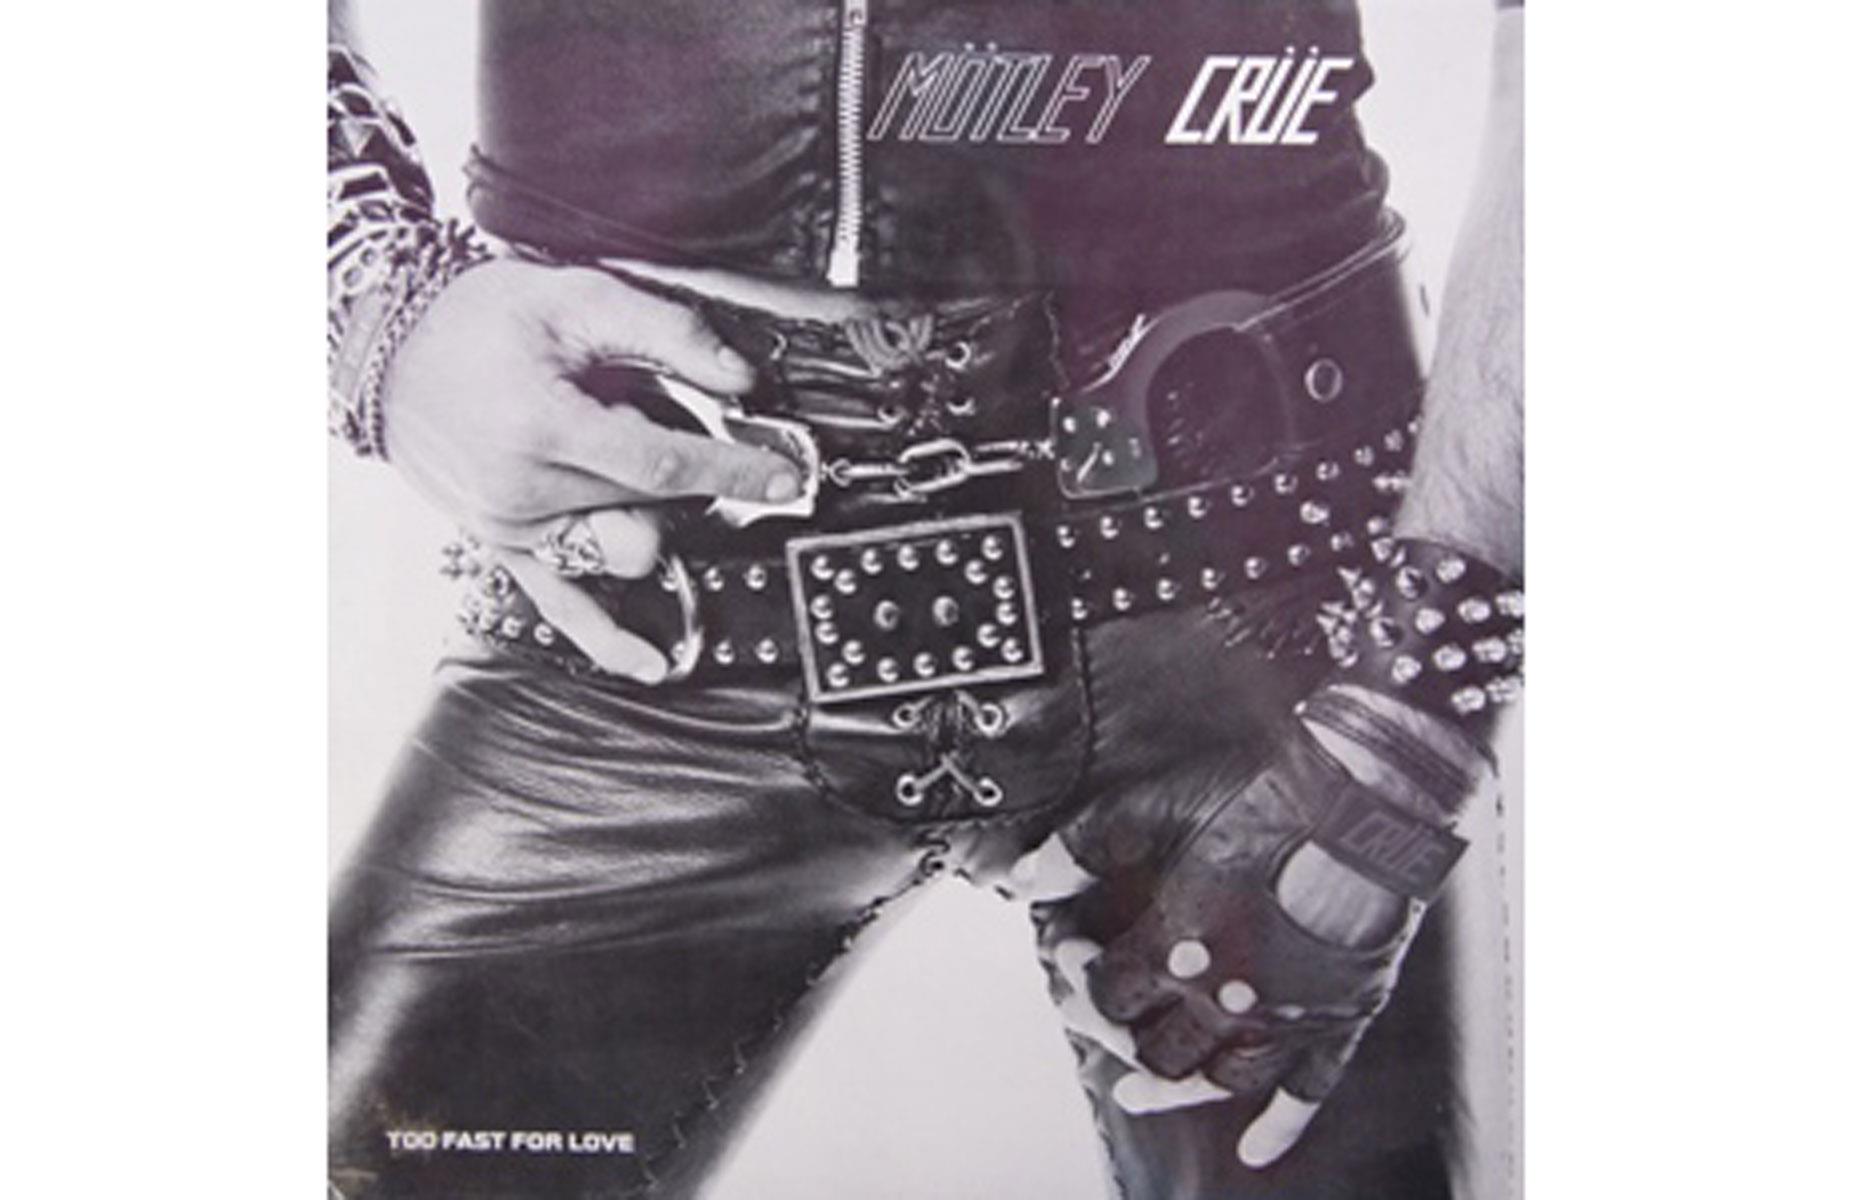 Mötley Crüe – Too Fast For Love: up to $2,700 (£2,294)